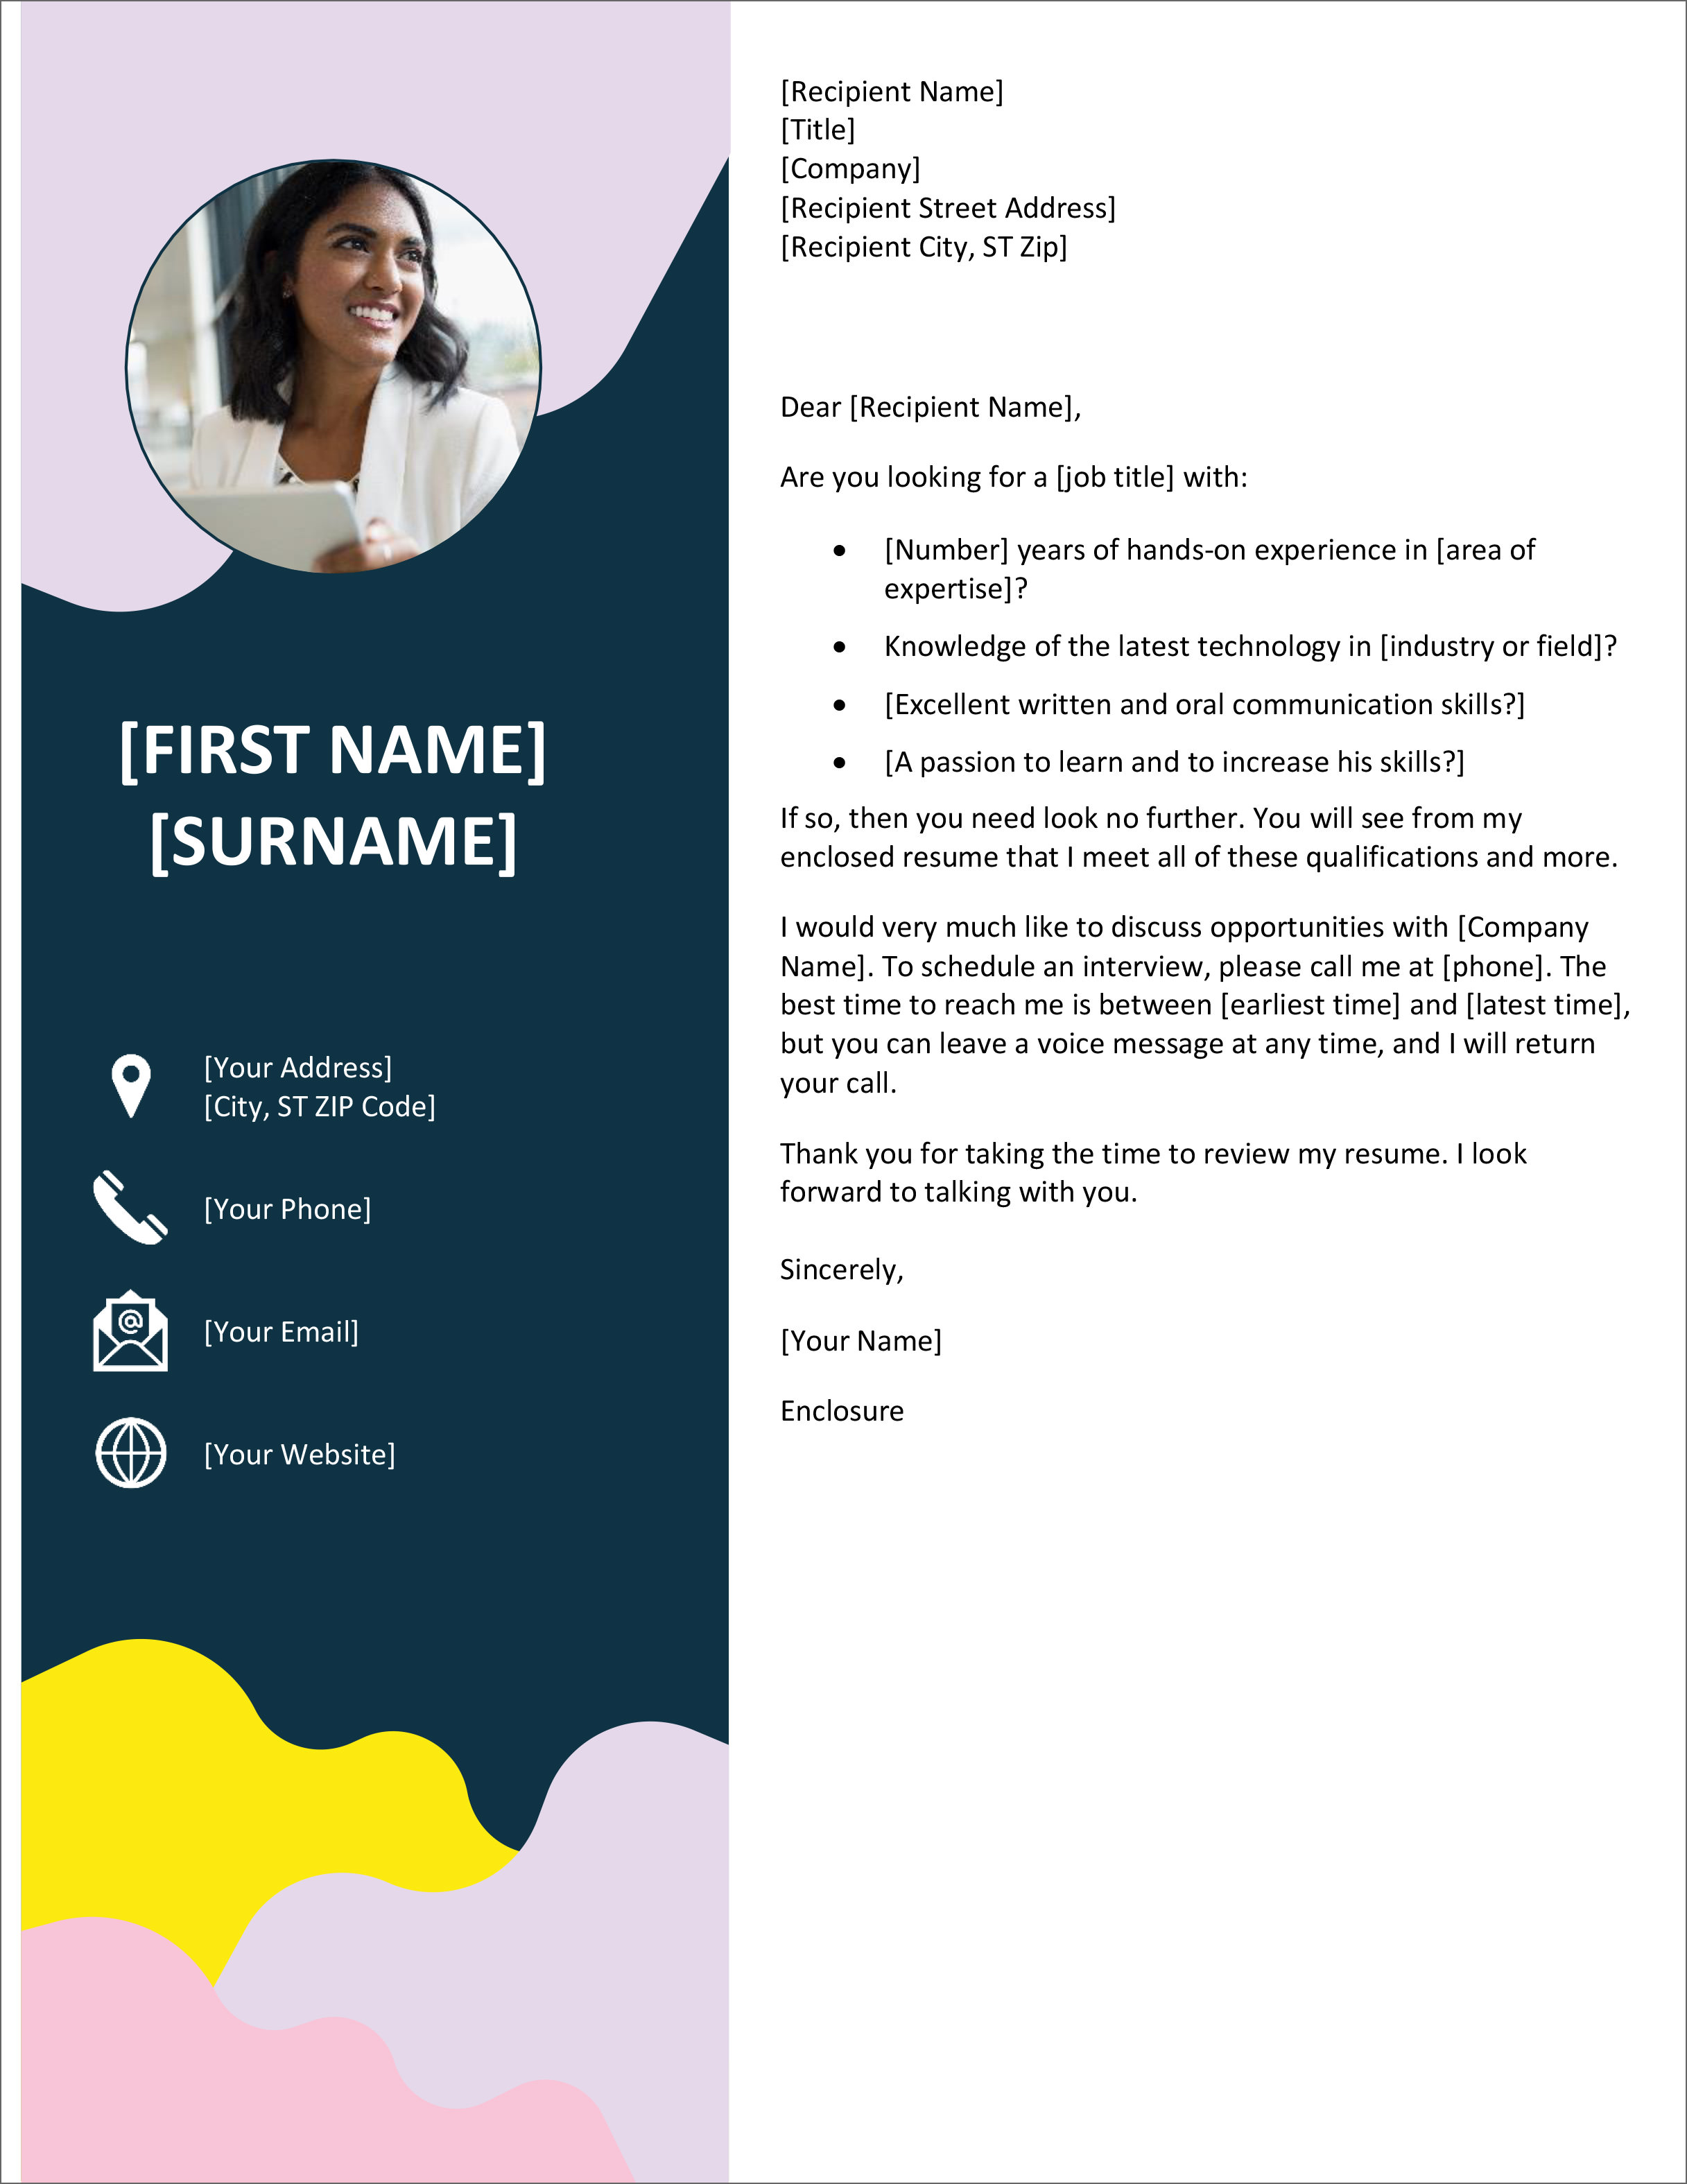 cover letter word template download